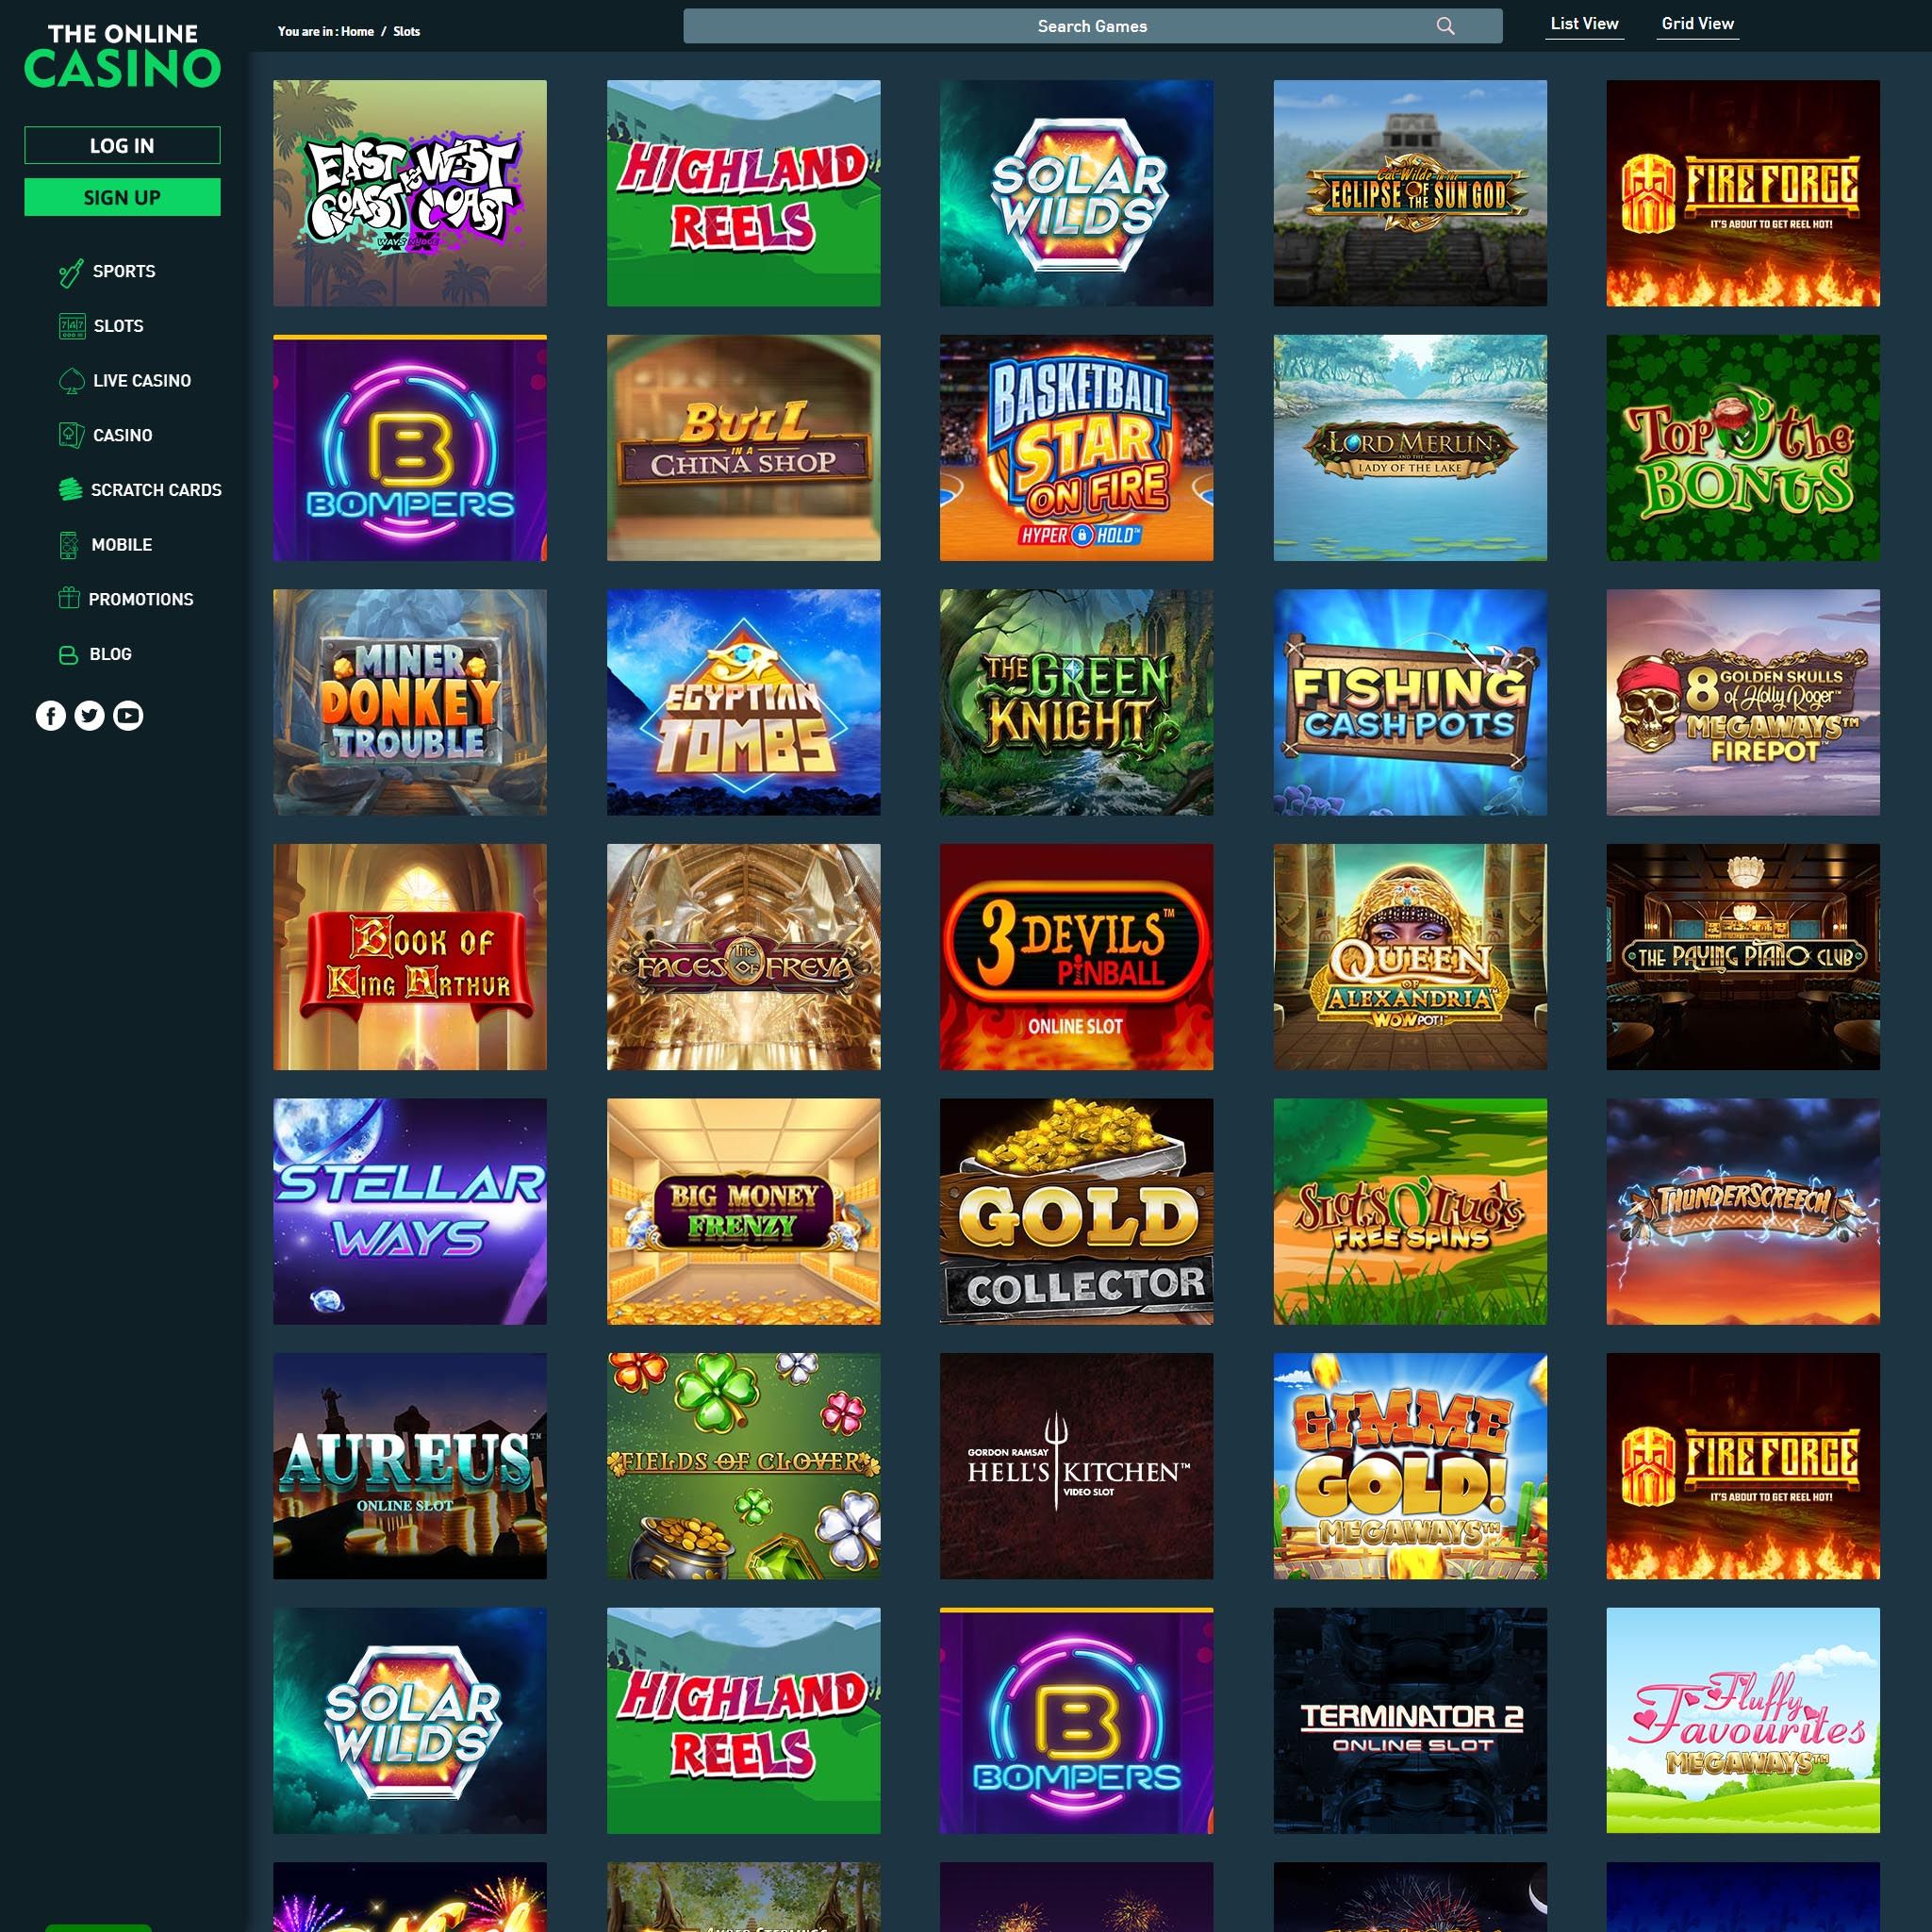 The Online Casino game catalogue